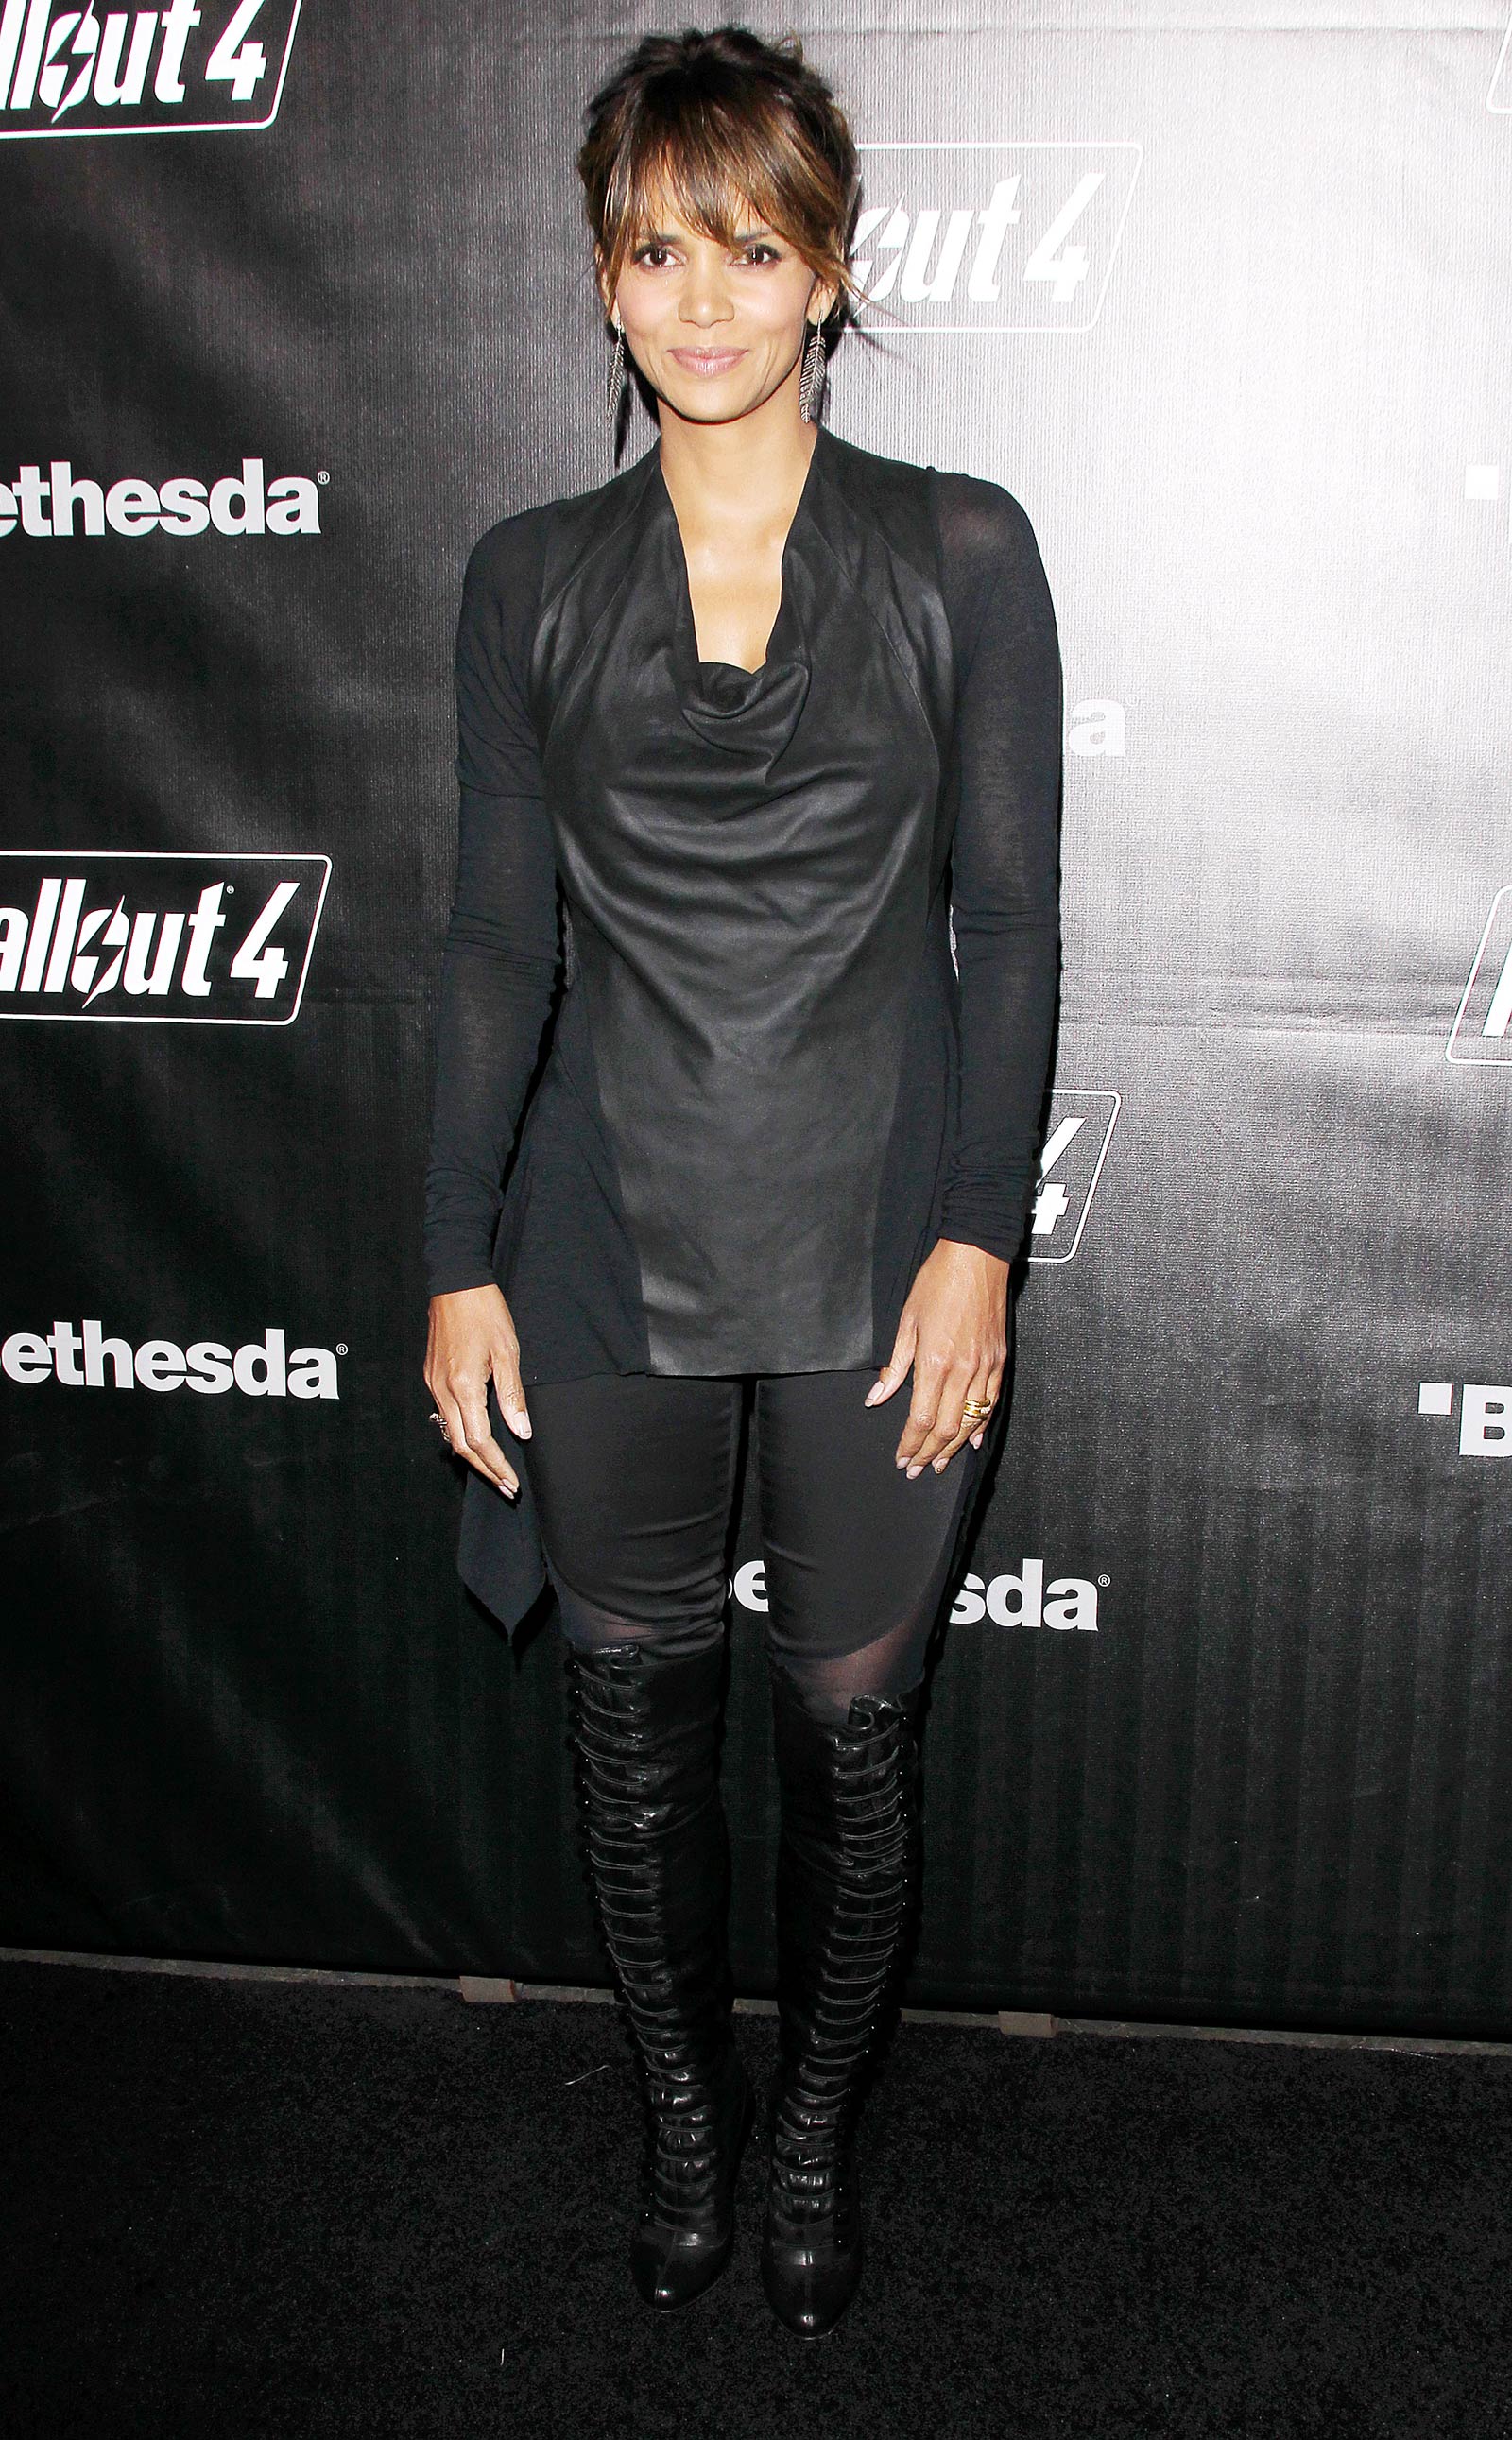 Halle Berry attends Fallout 4 launch party